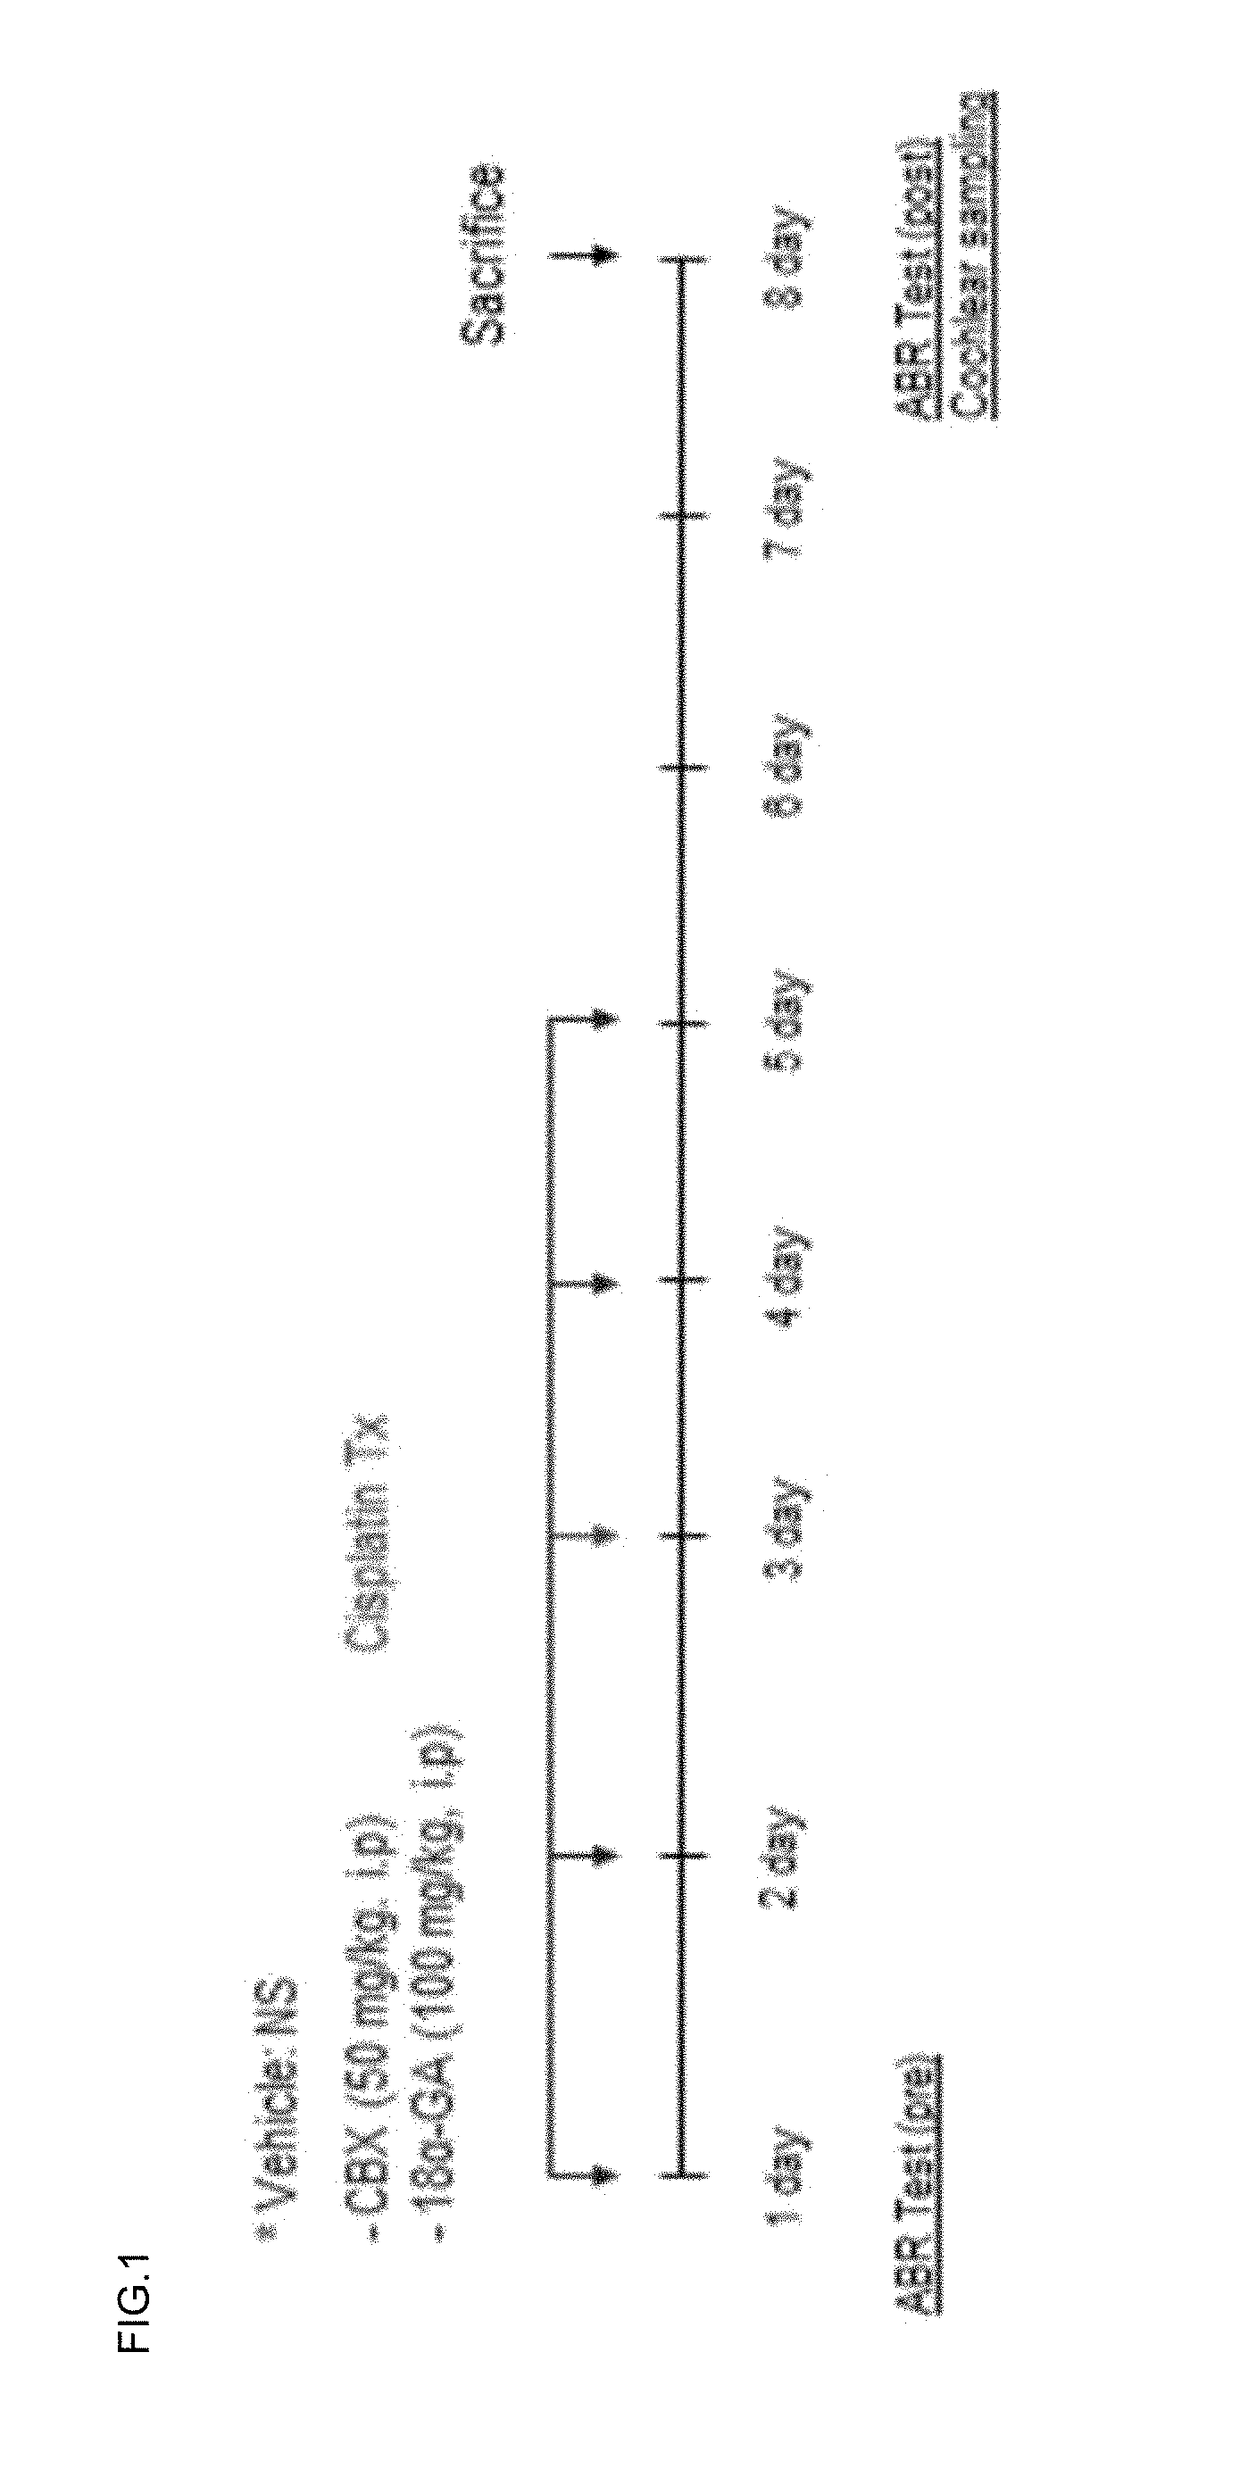 Pharmaceutical composition for preventing or treating hearing loss, comprising carbenoxolone or its pharmaceutically acceptable salts as effective compound